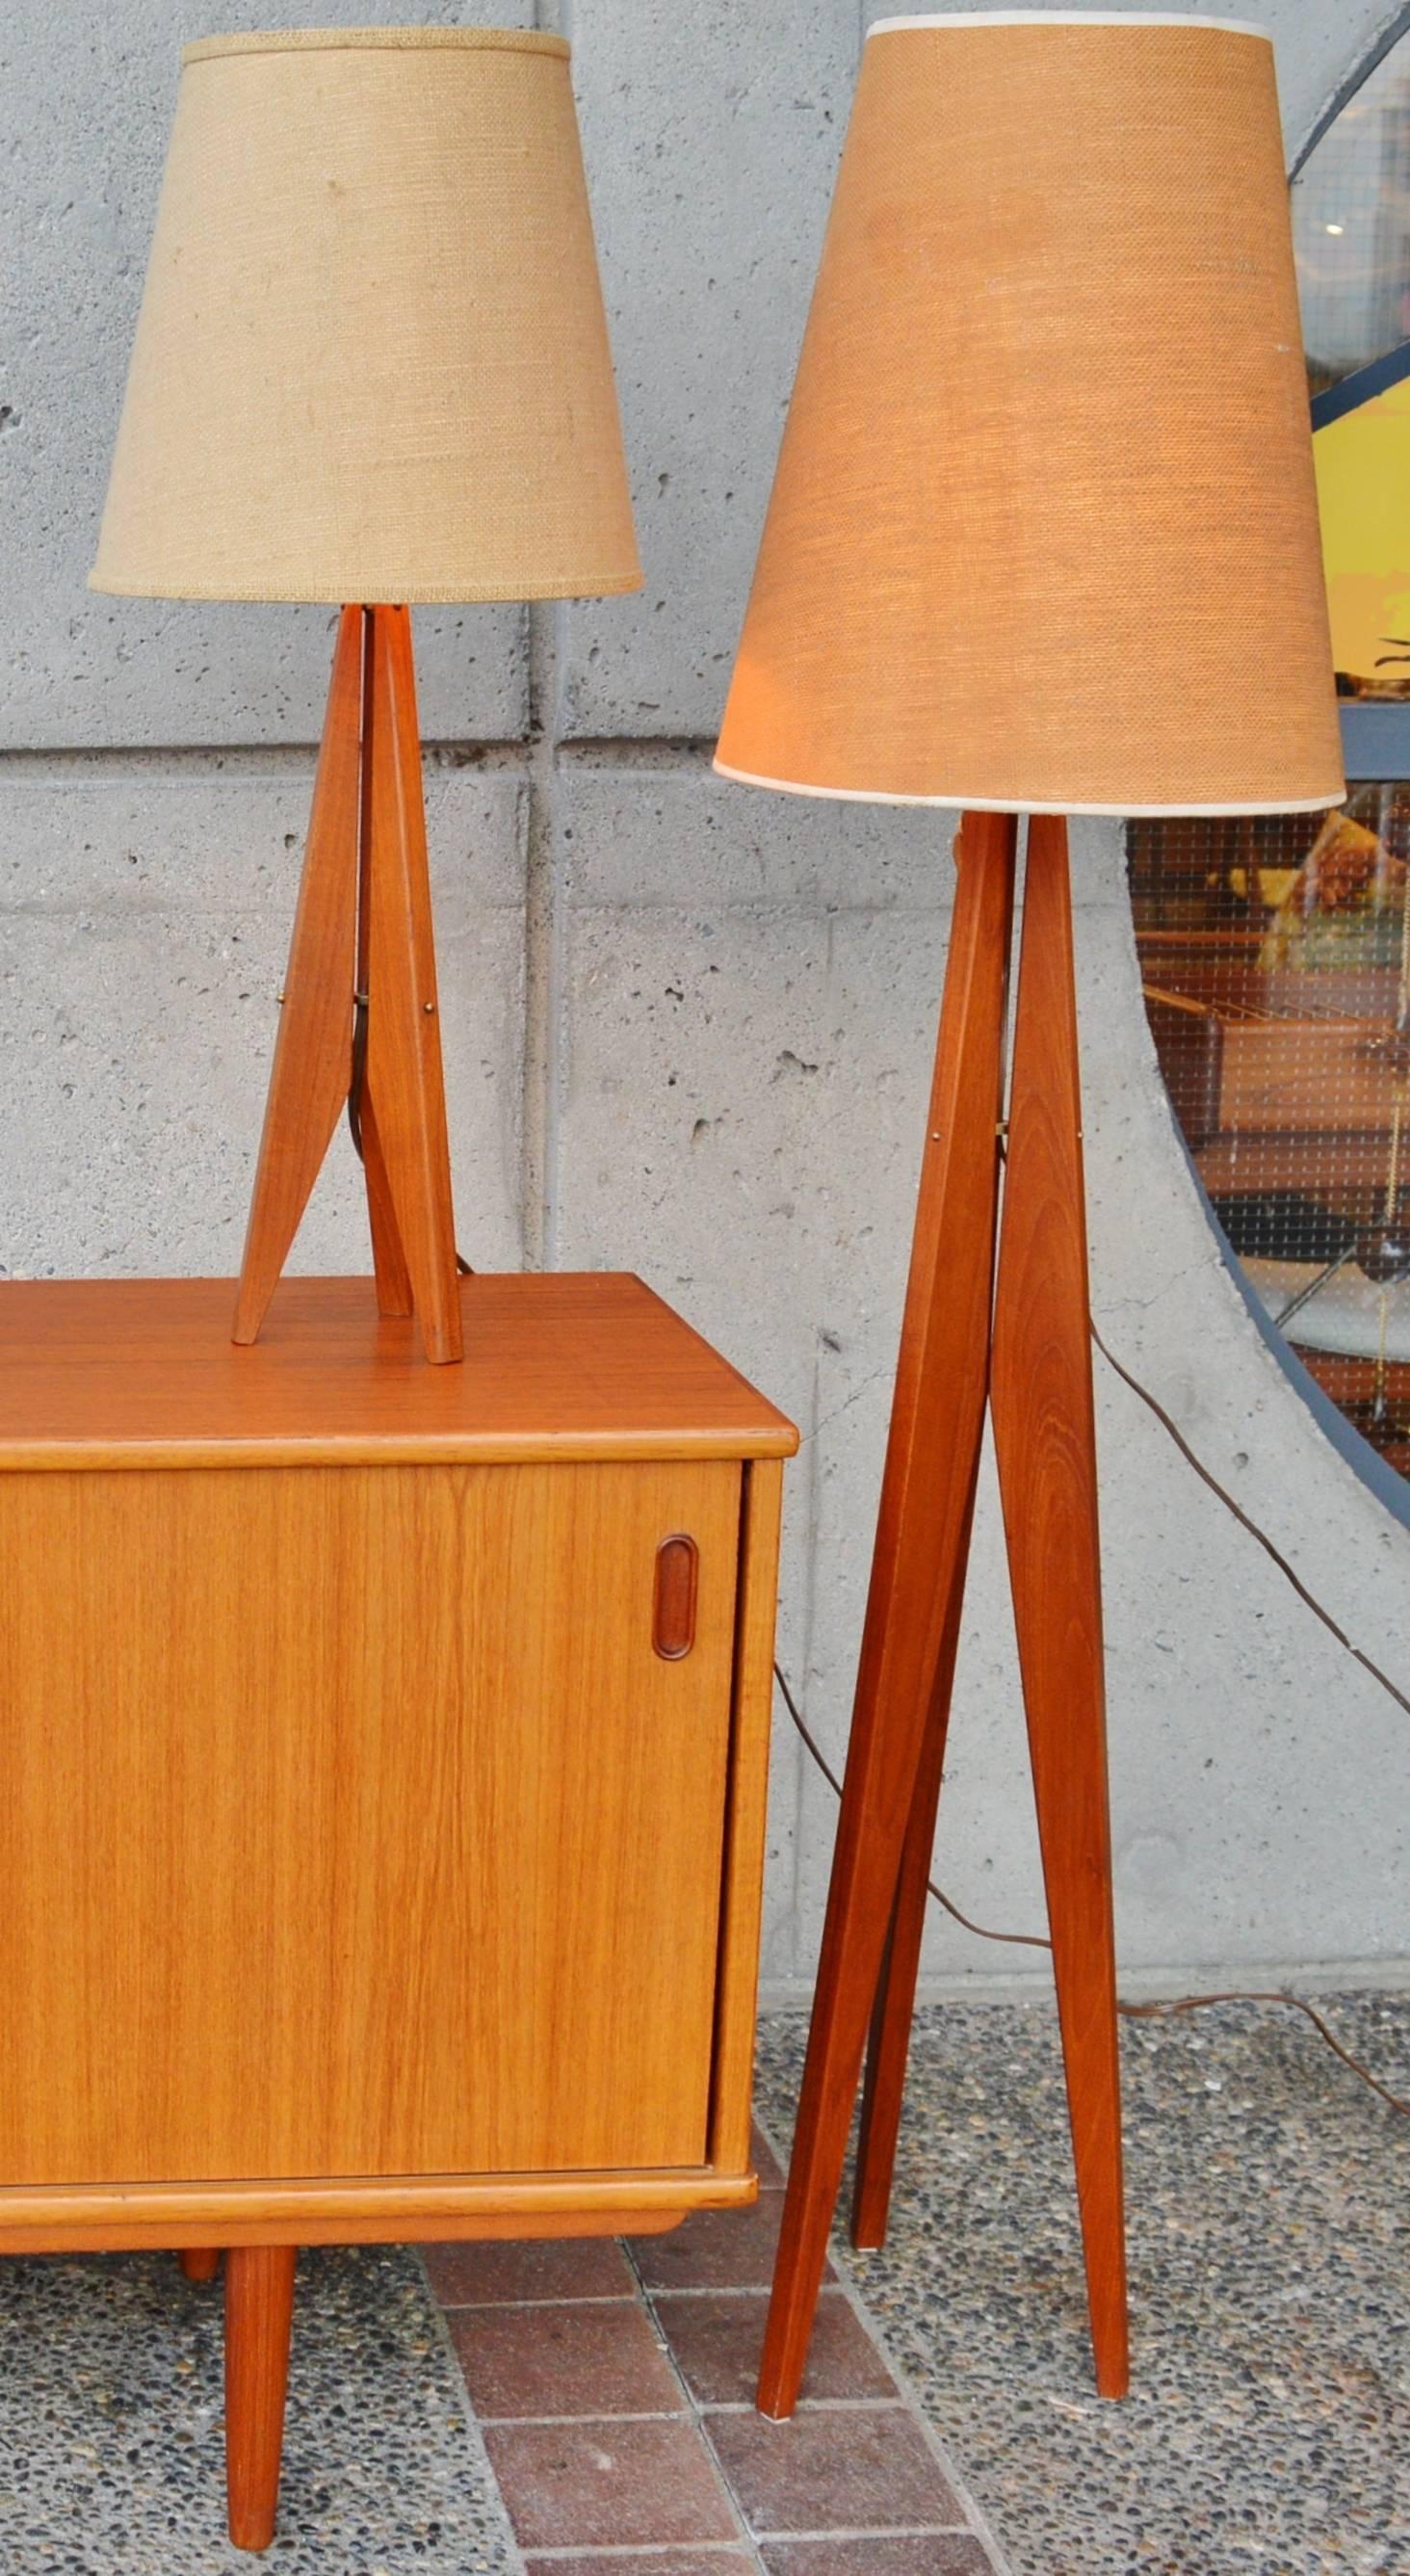 These stellar Danish Modern teak tripod lamps are iconic and minimalistic. Each is made with 3 solid teak legs that taper at the top, flare in the middle, and then taper again to the ends with brass hardware to connect them. In excellent condition.